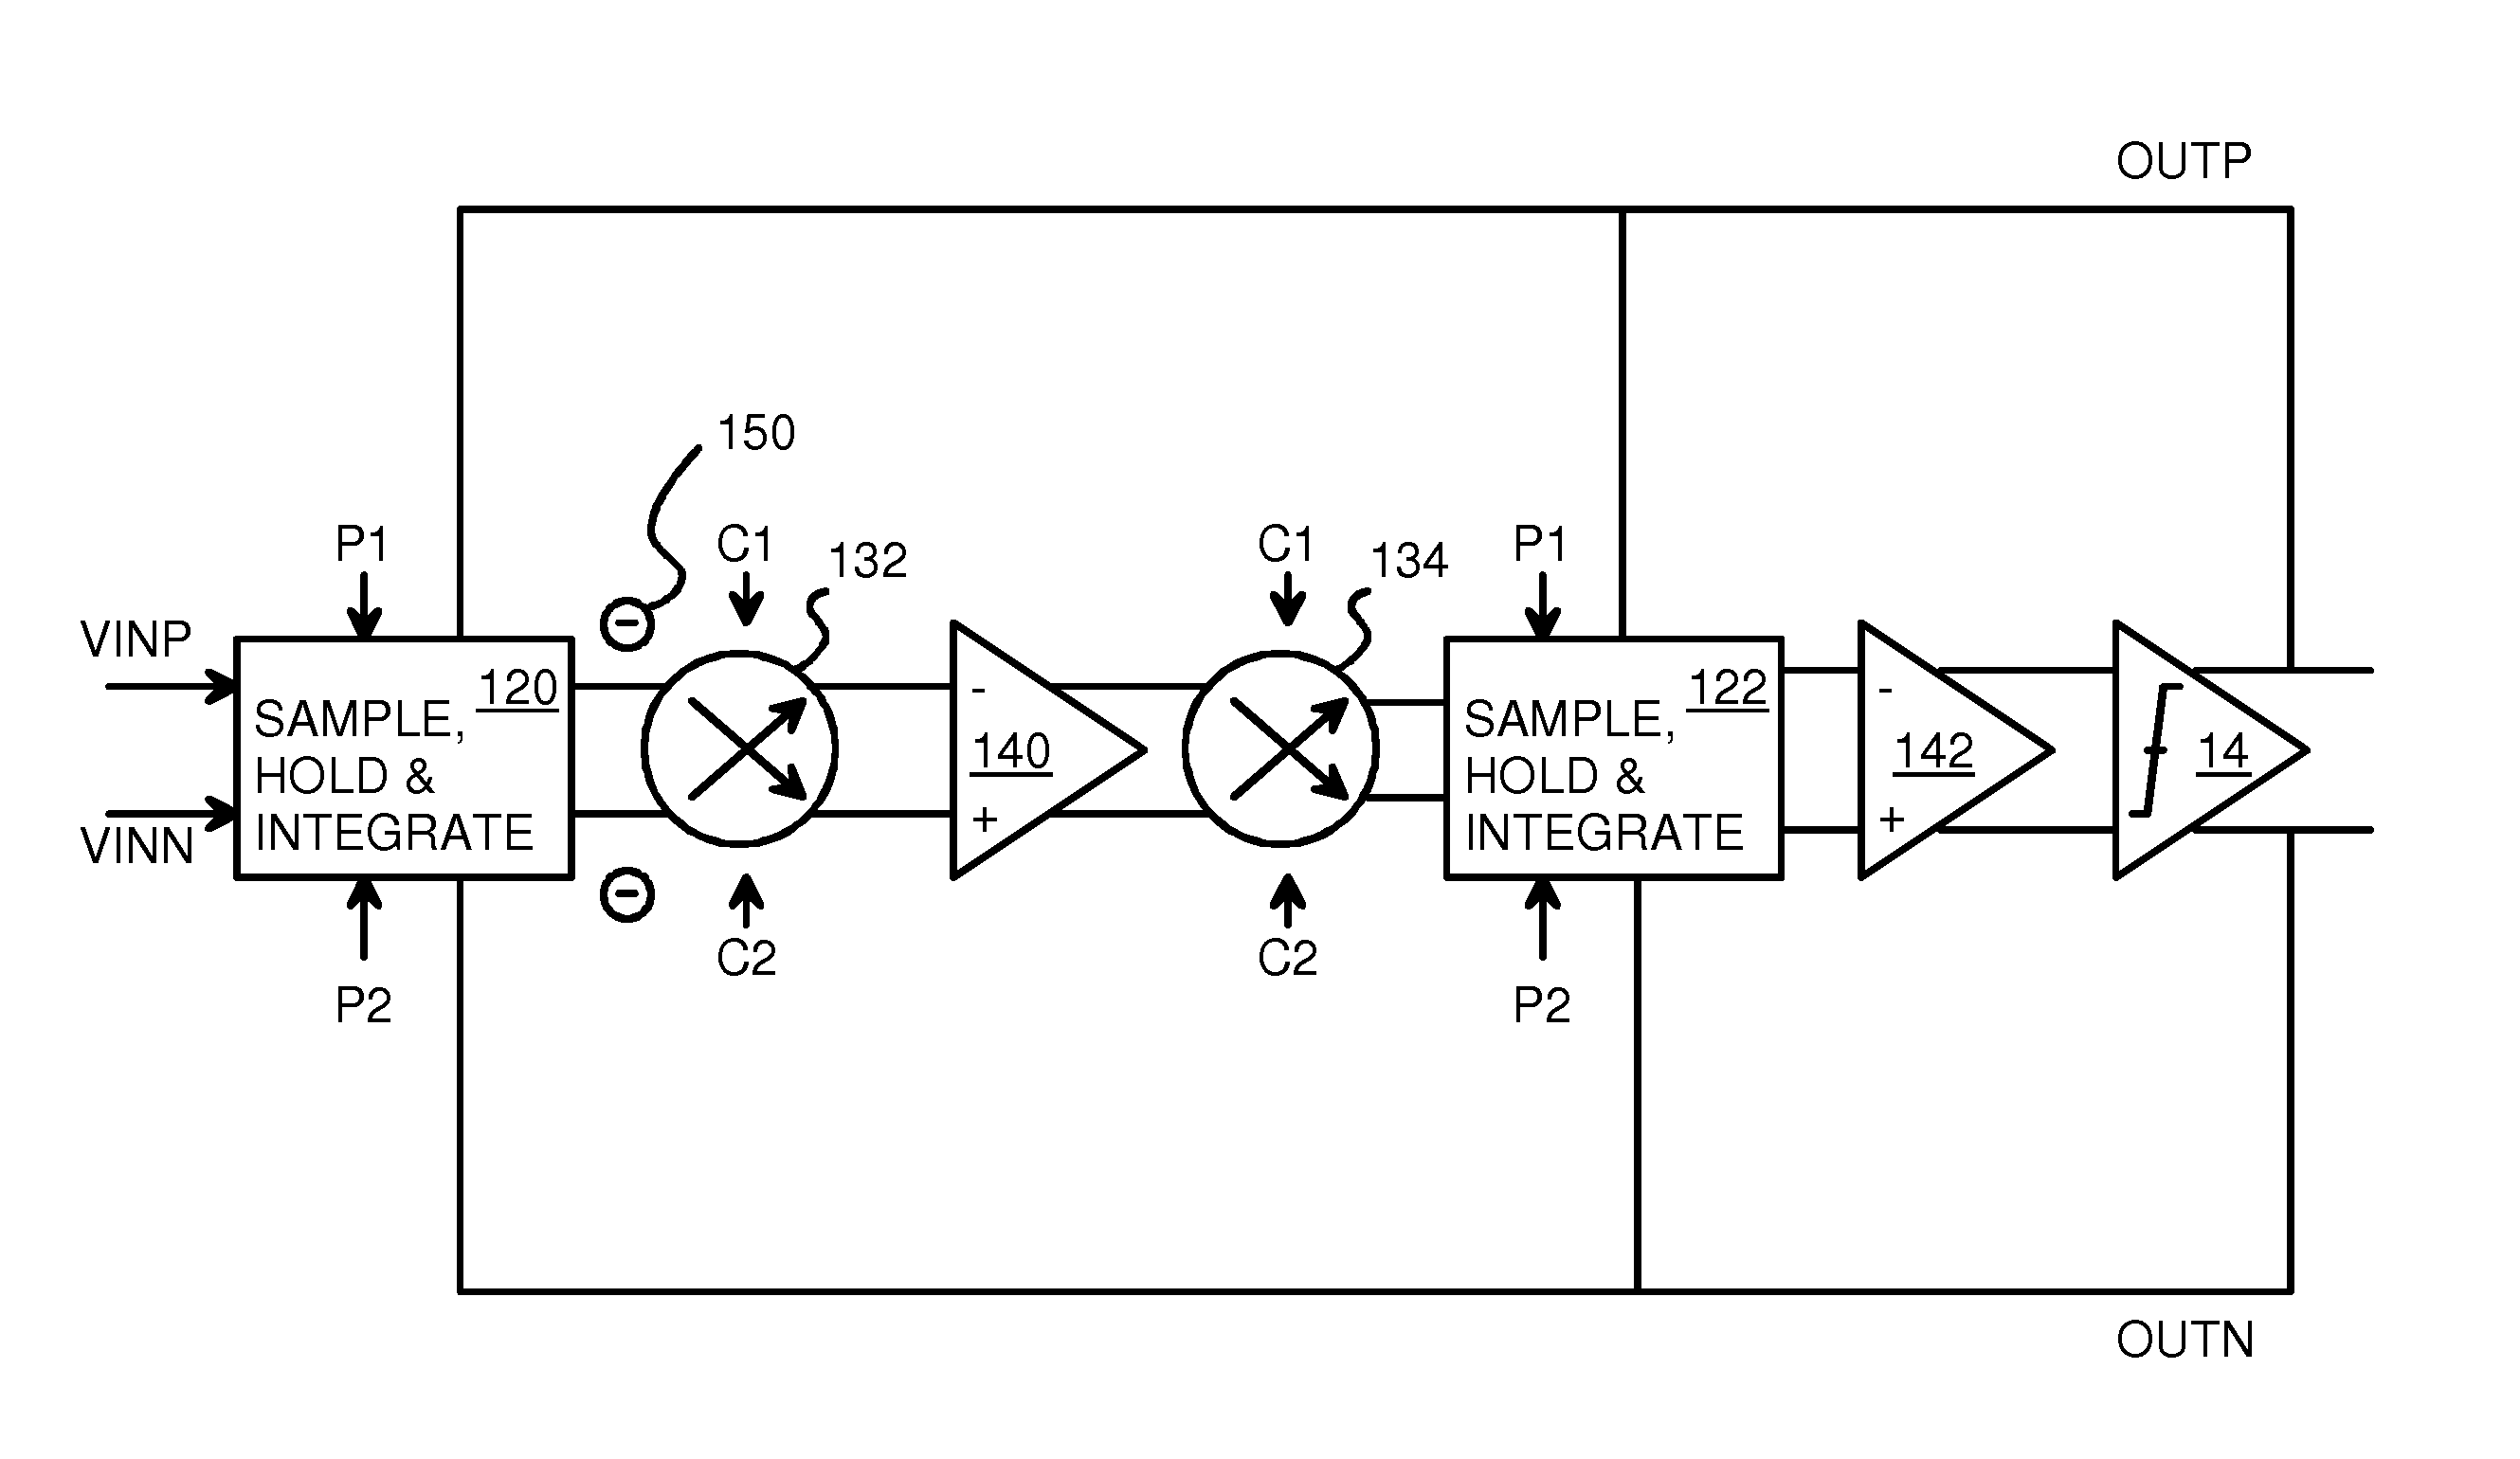 Reduced residual offset sigma delta analog-to-digital converter (ADC) with chopper timing at end of integrating phase before trailing edge